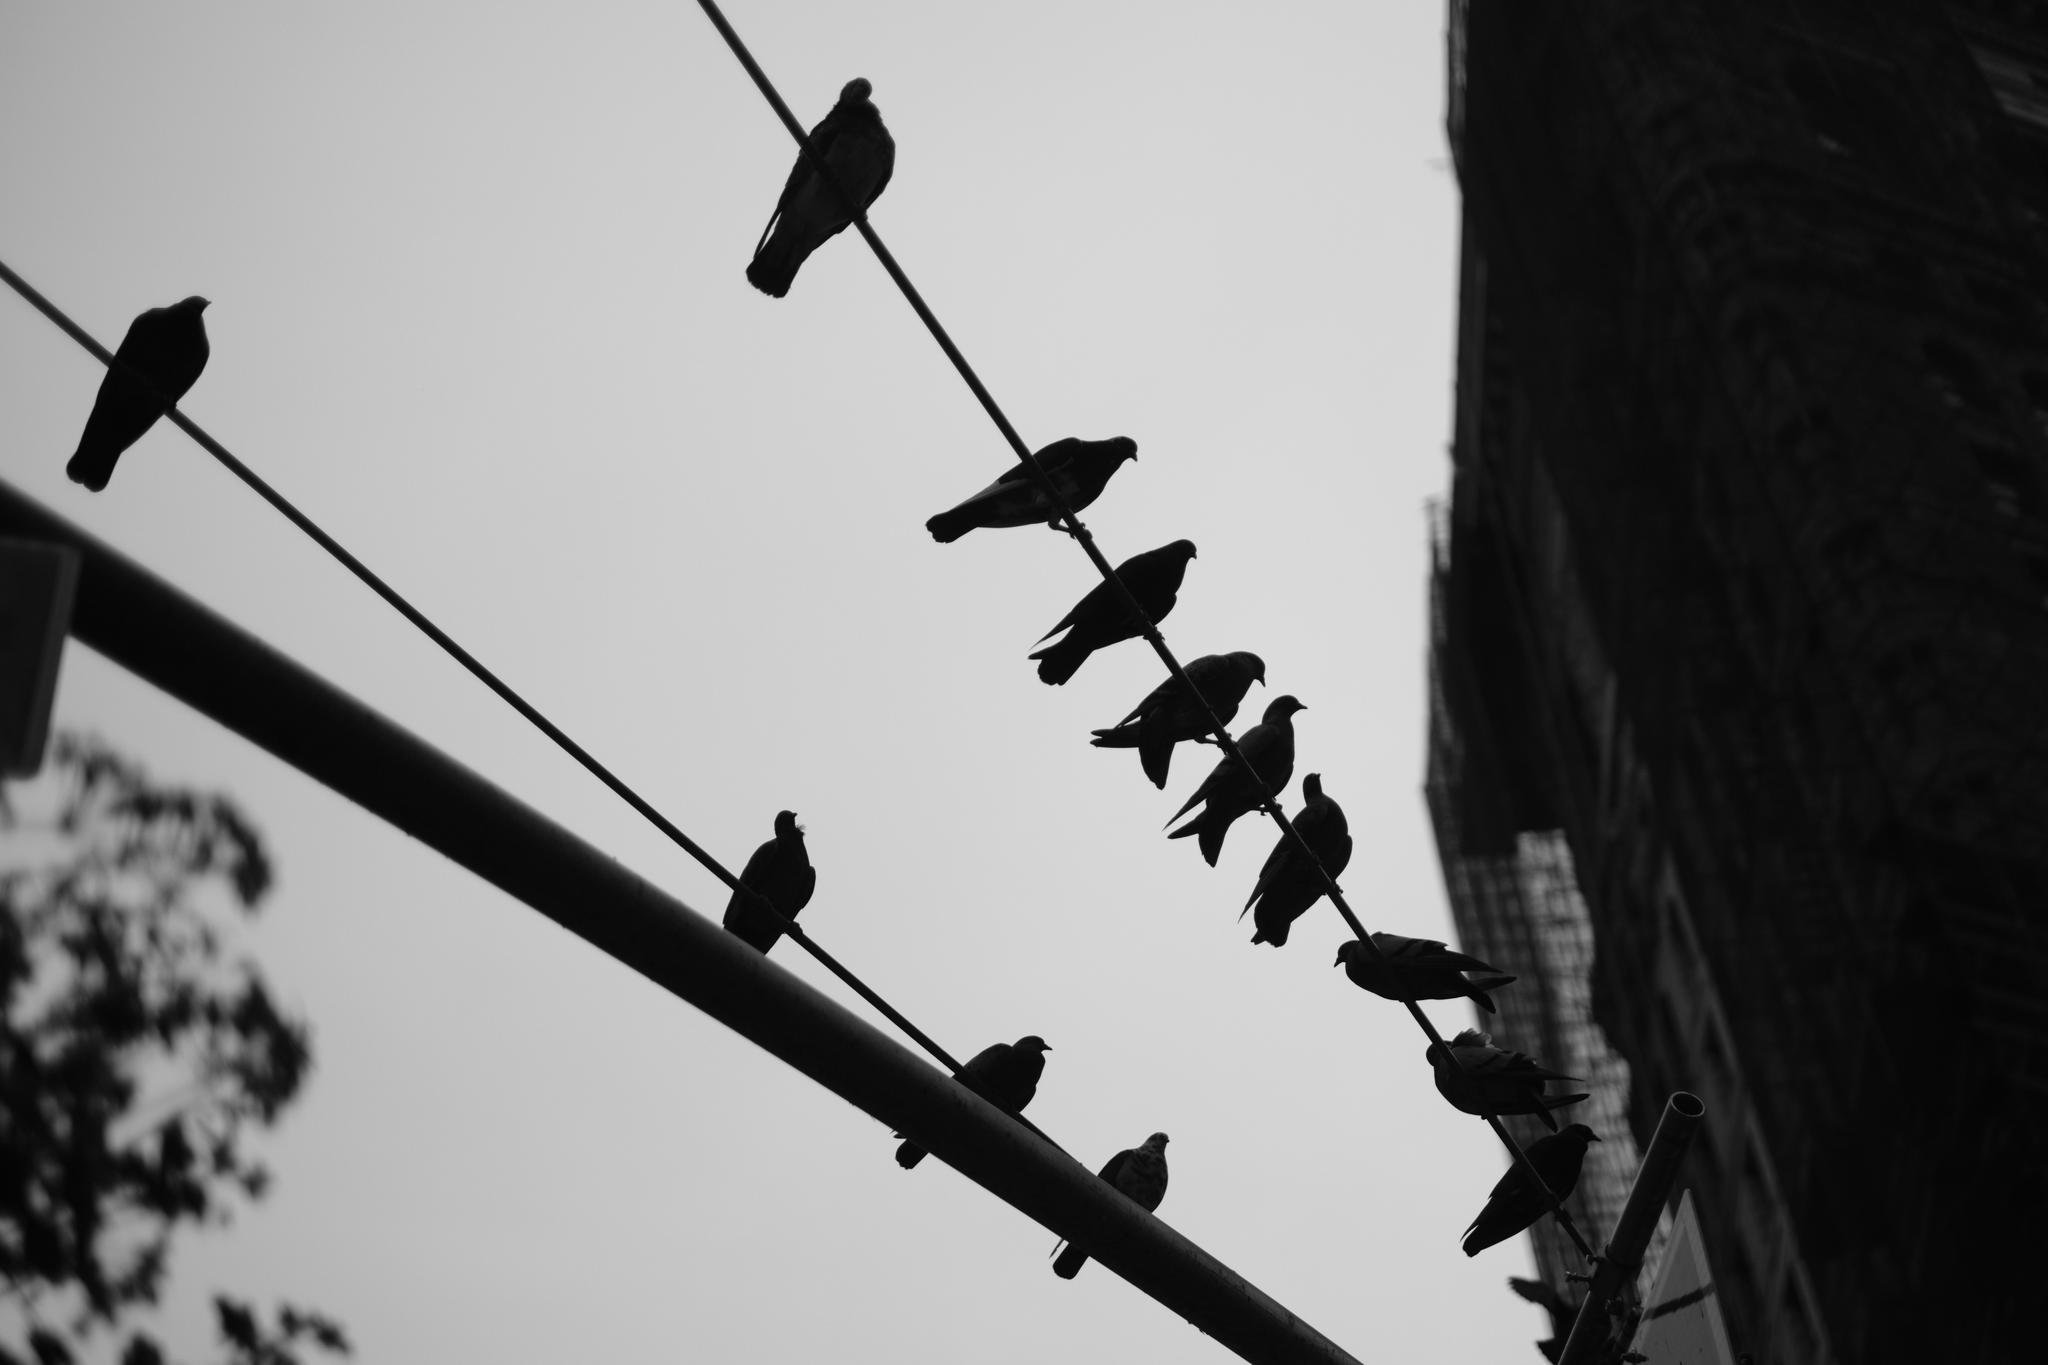 Silhouettes of birds perched on power lines against a gray sky, with a building and tree branches in the background